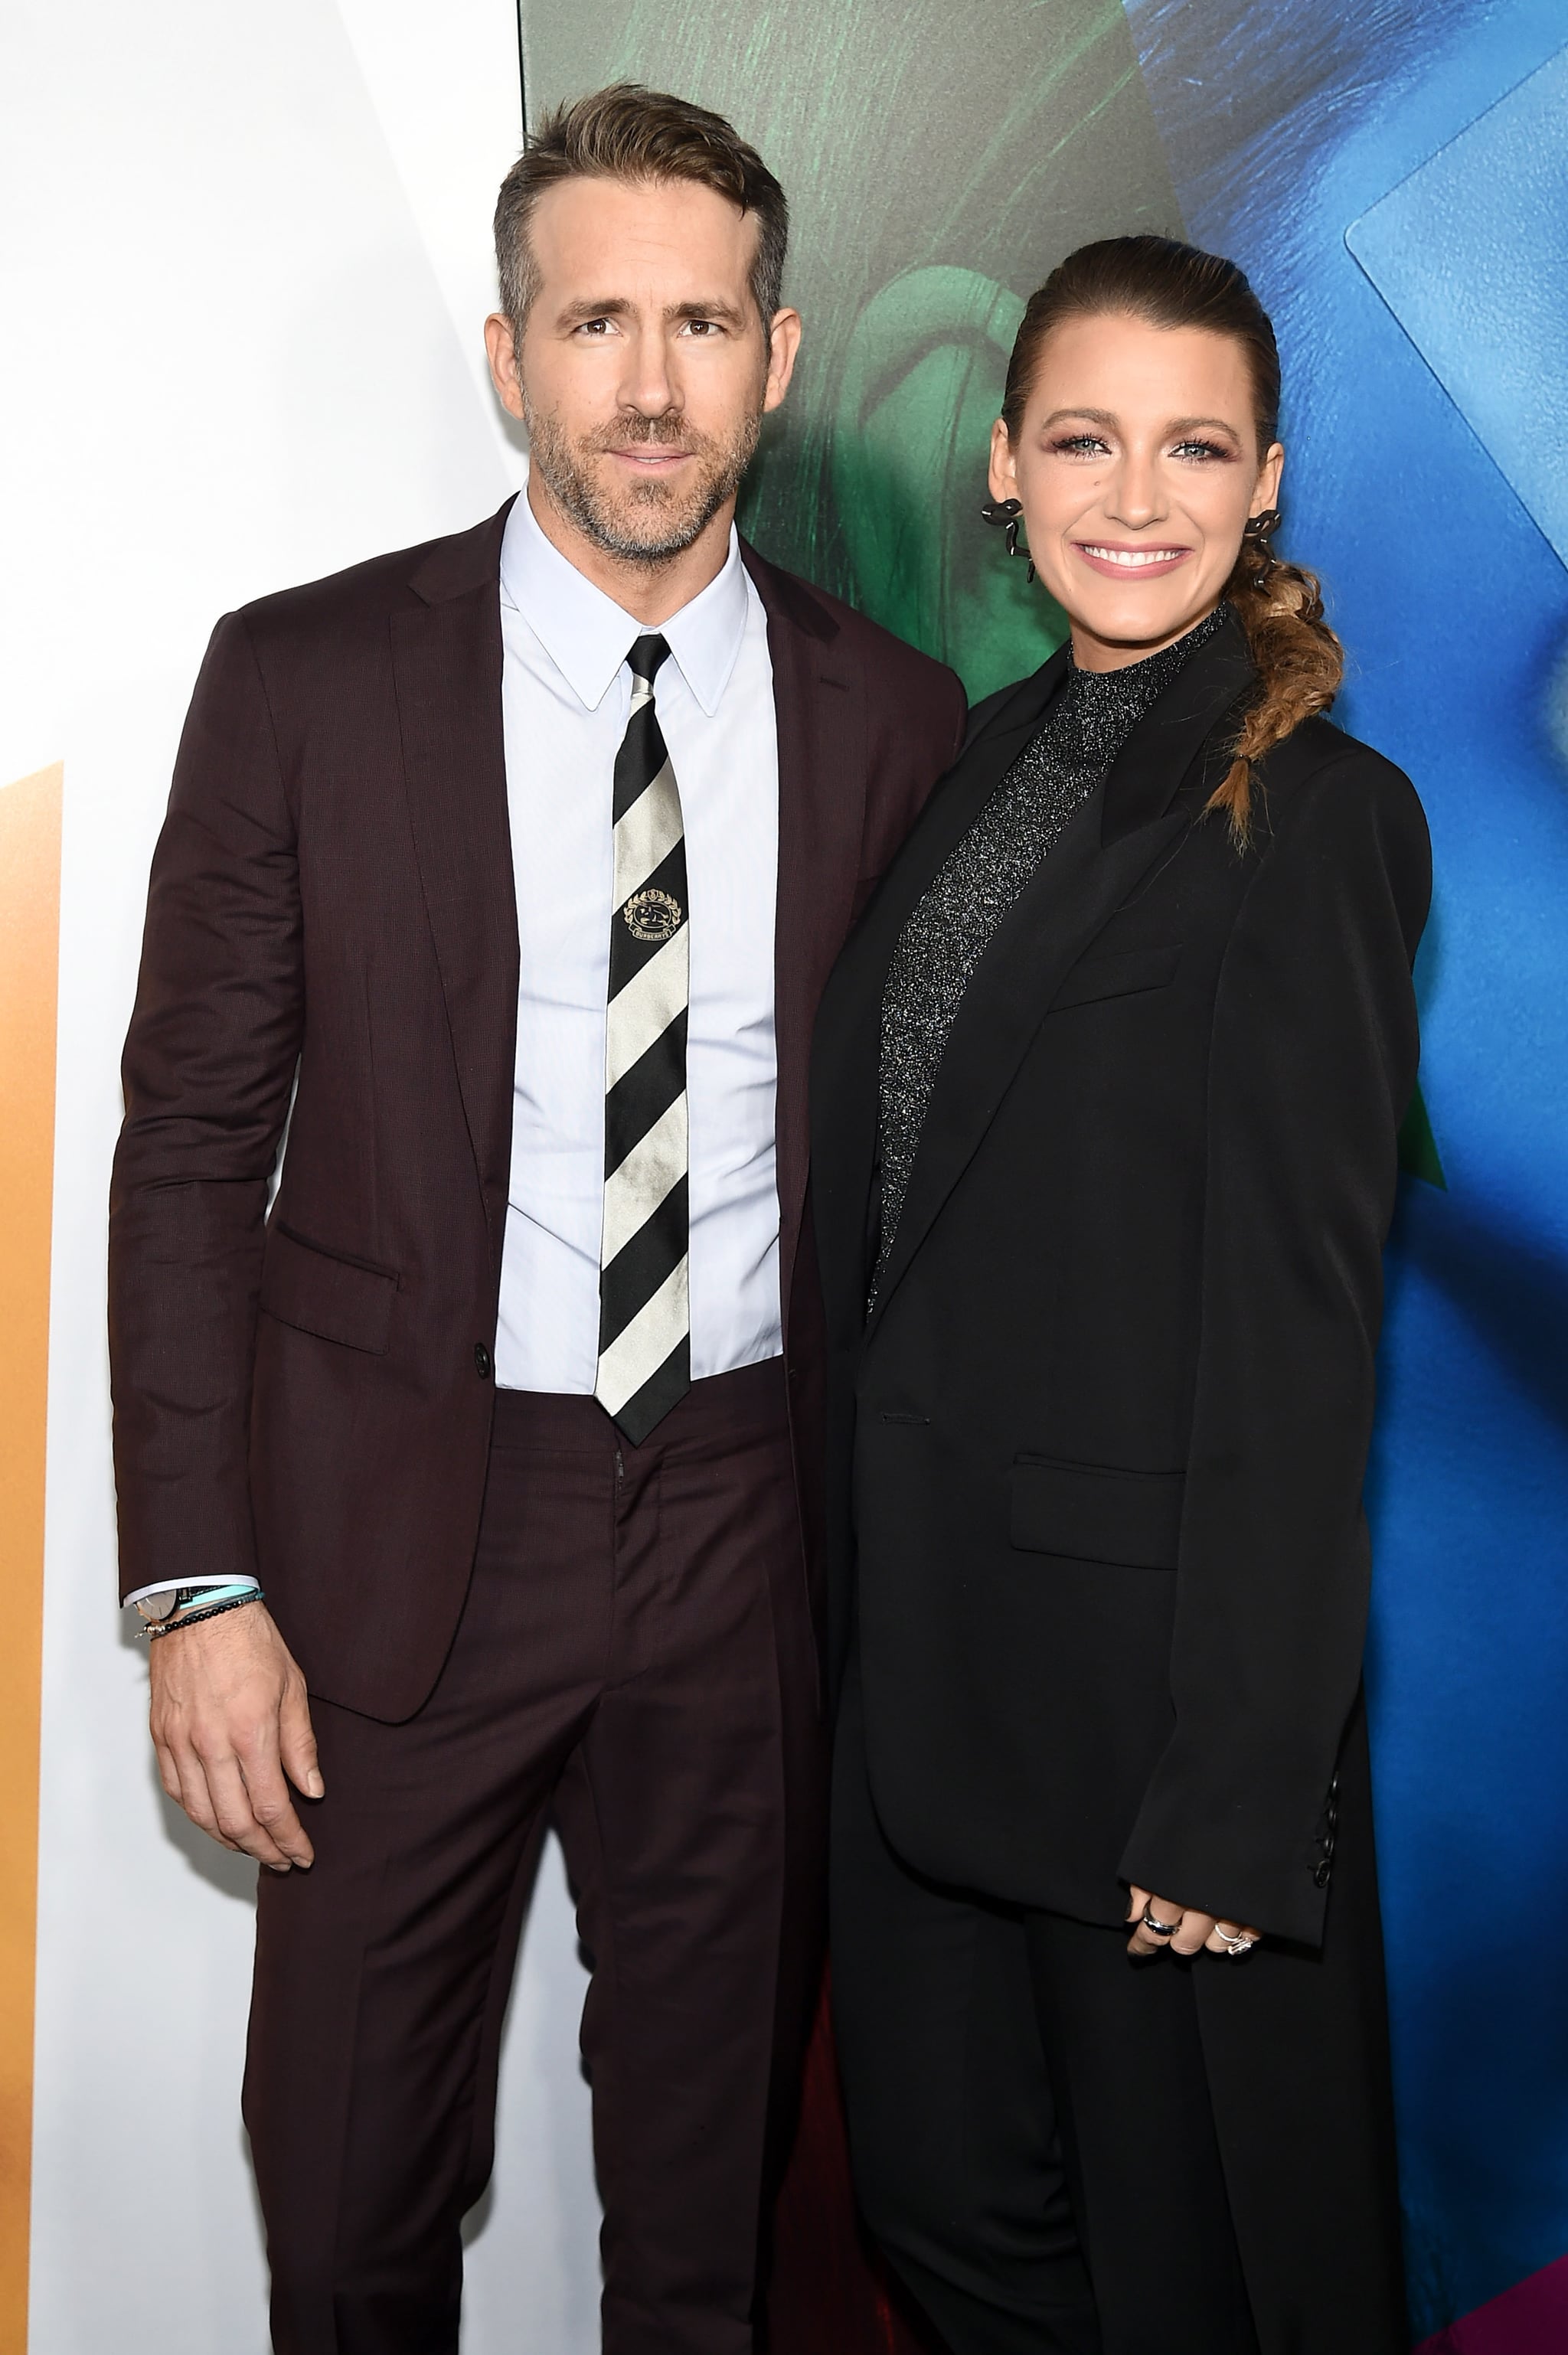 Blake Lively & Ryan Reynolds Couple Up at 'A Simple Favor